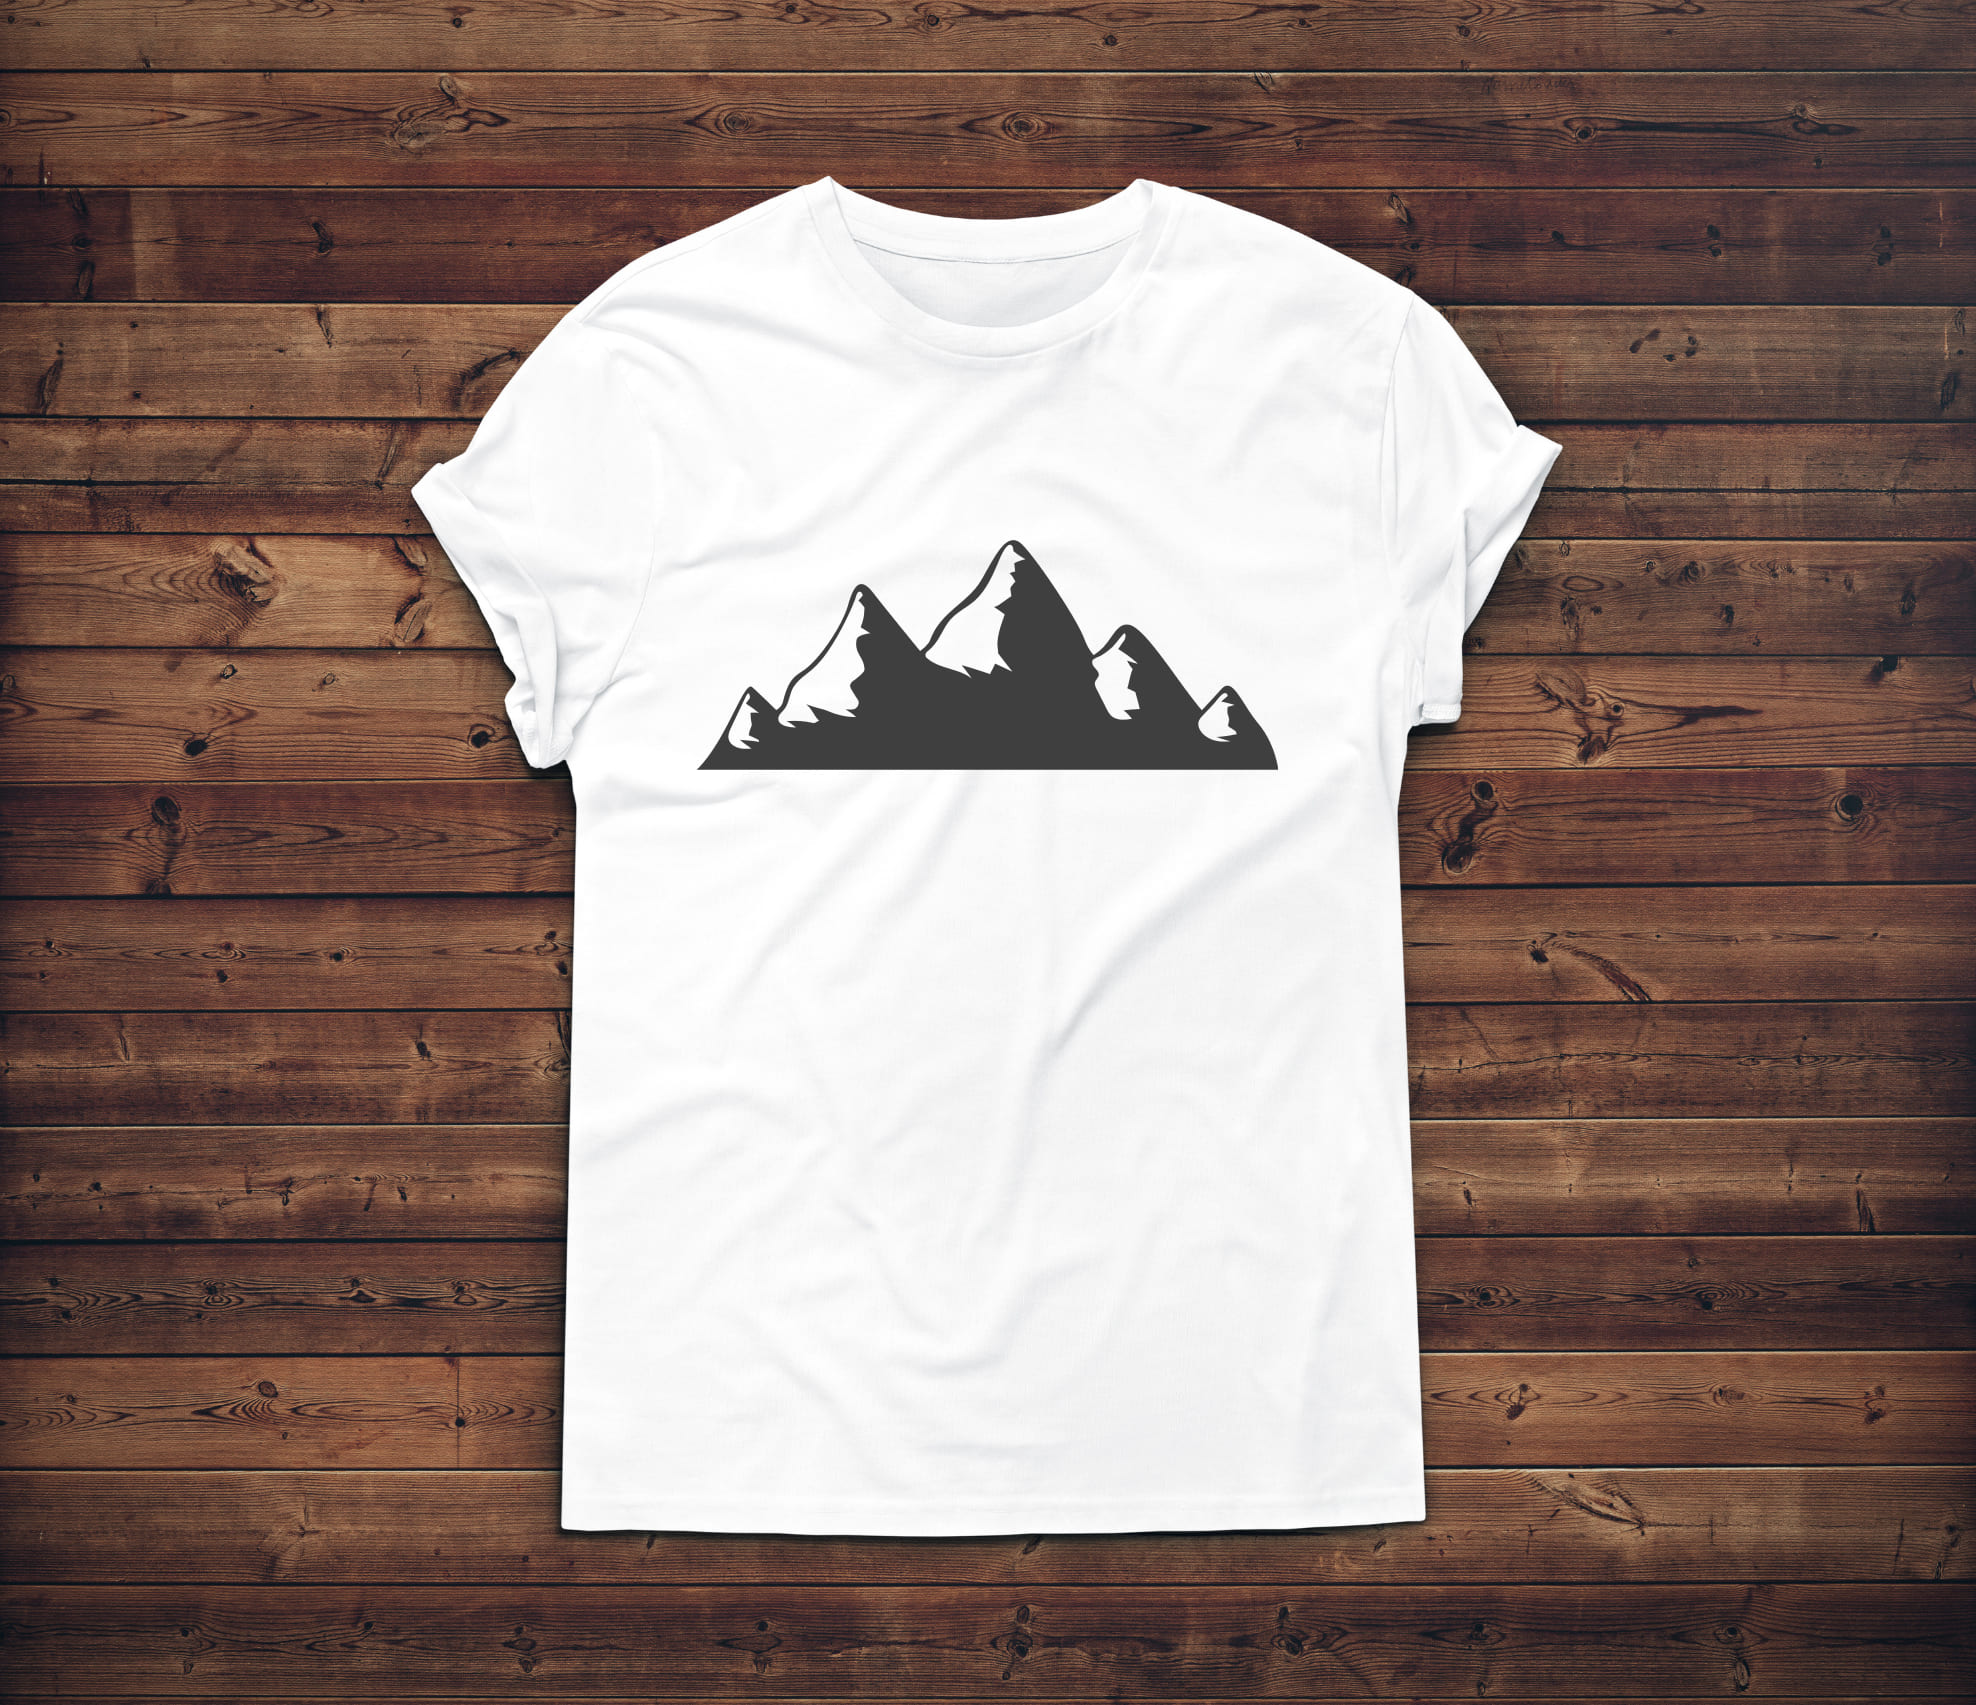 Image of a white t-shirt with a beautiful print of the silhouette of the mountains.